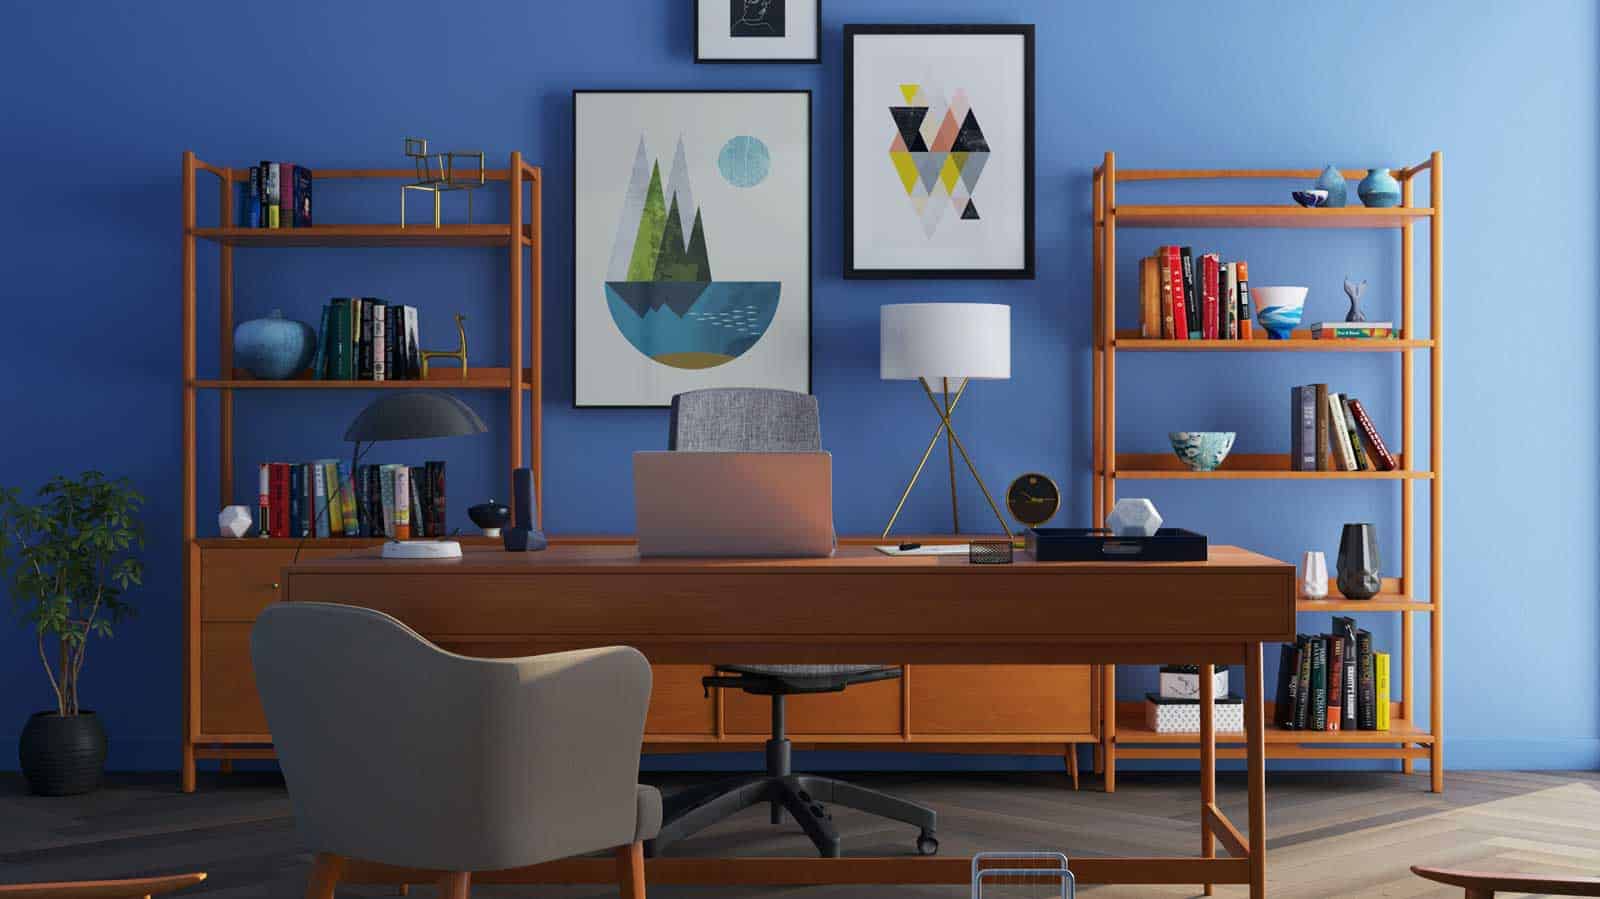 What’s The Best Color For Office Walls?